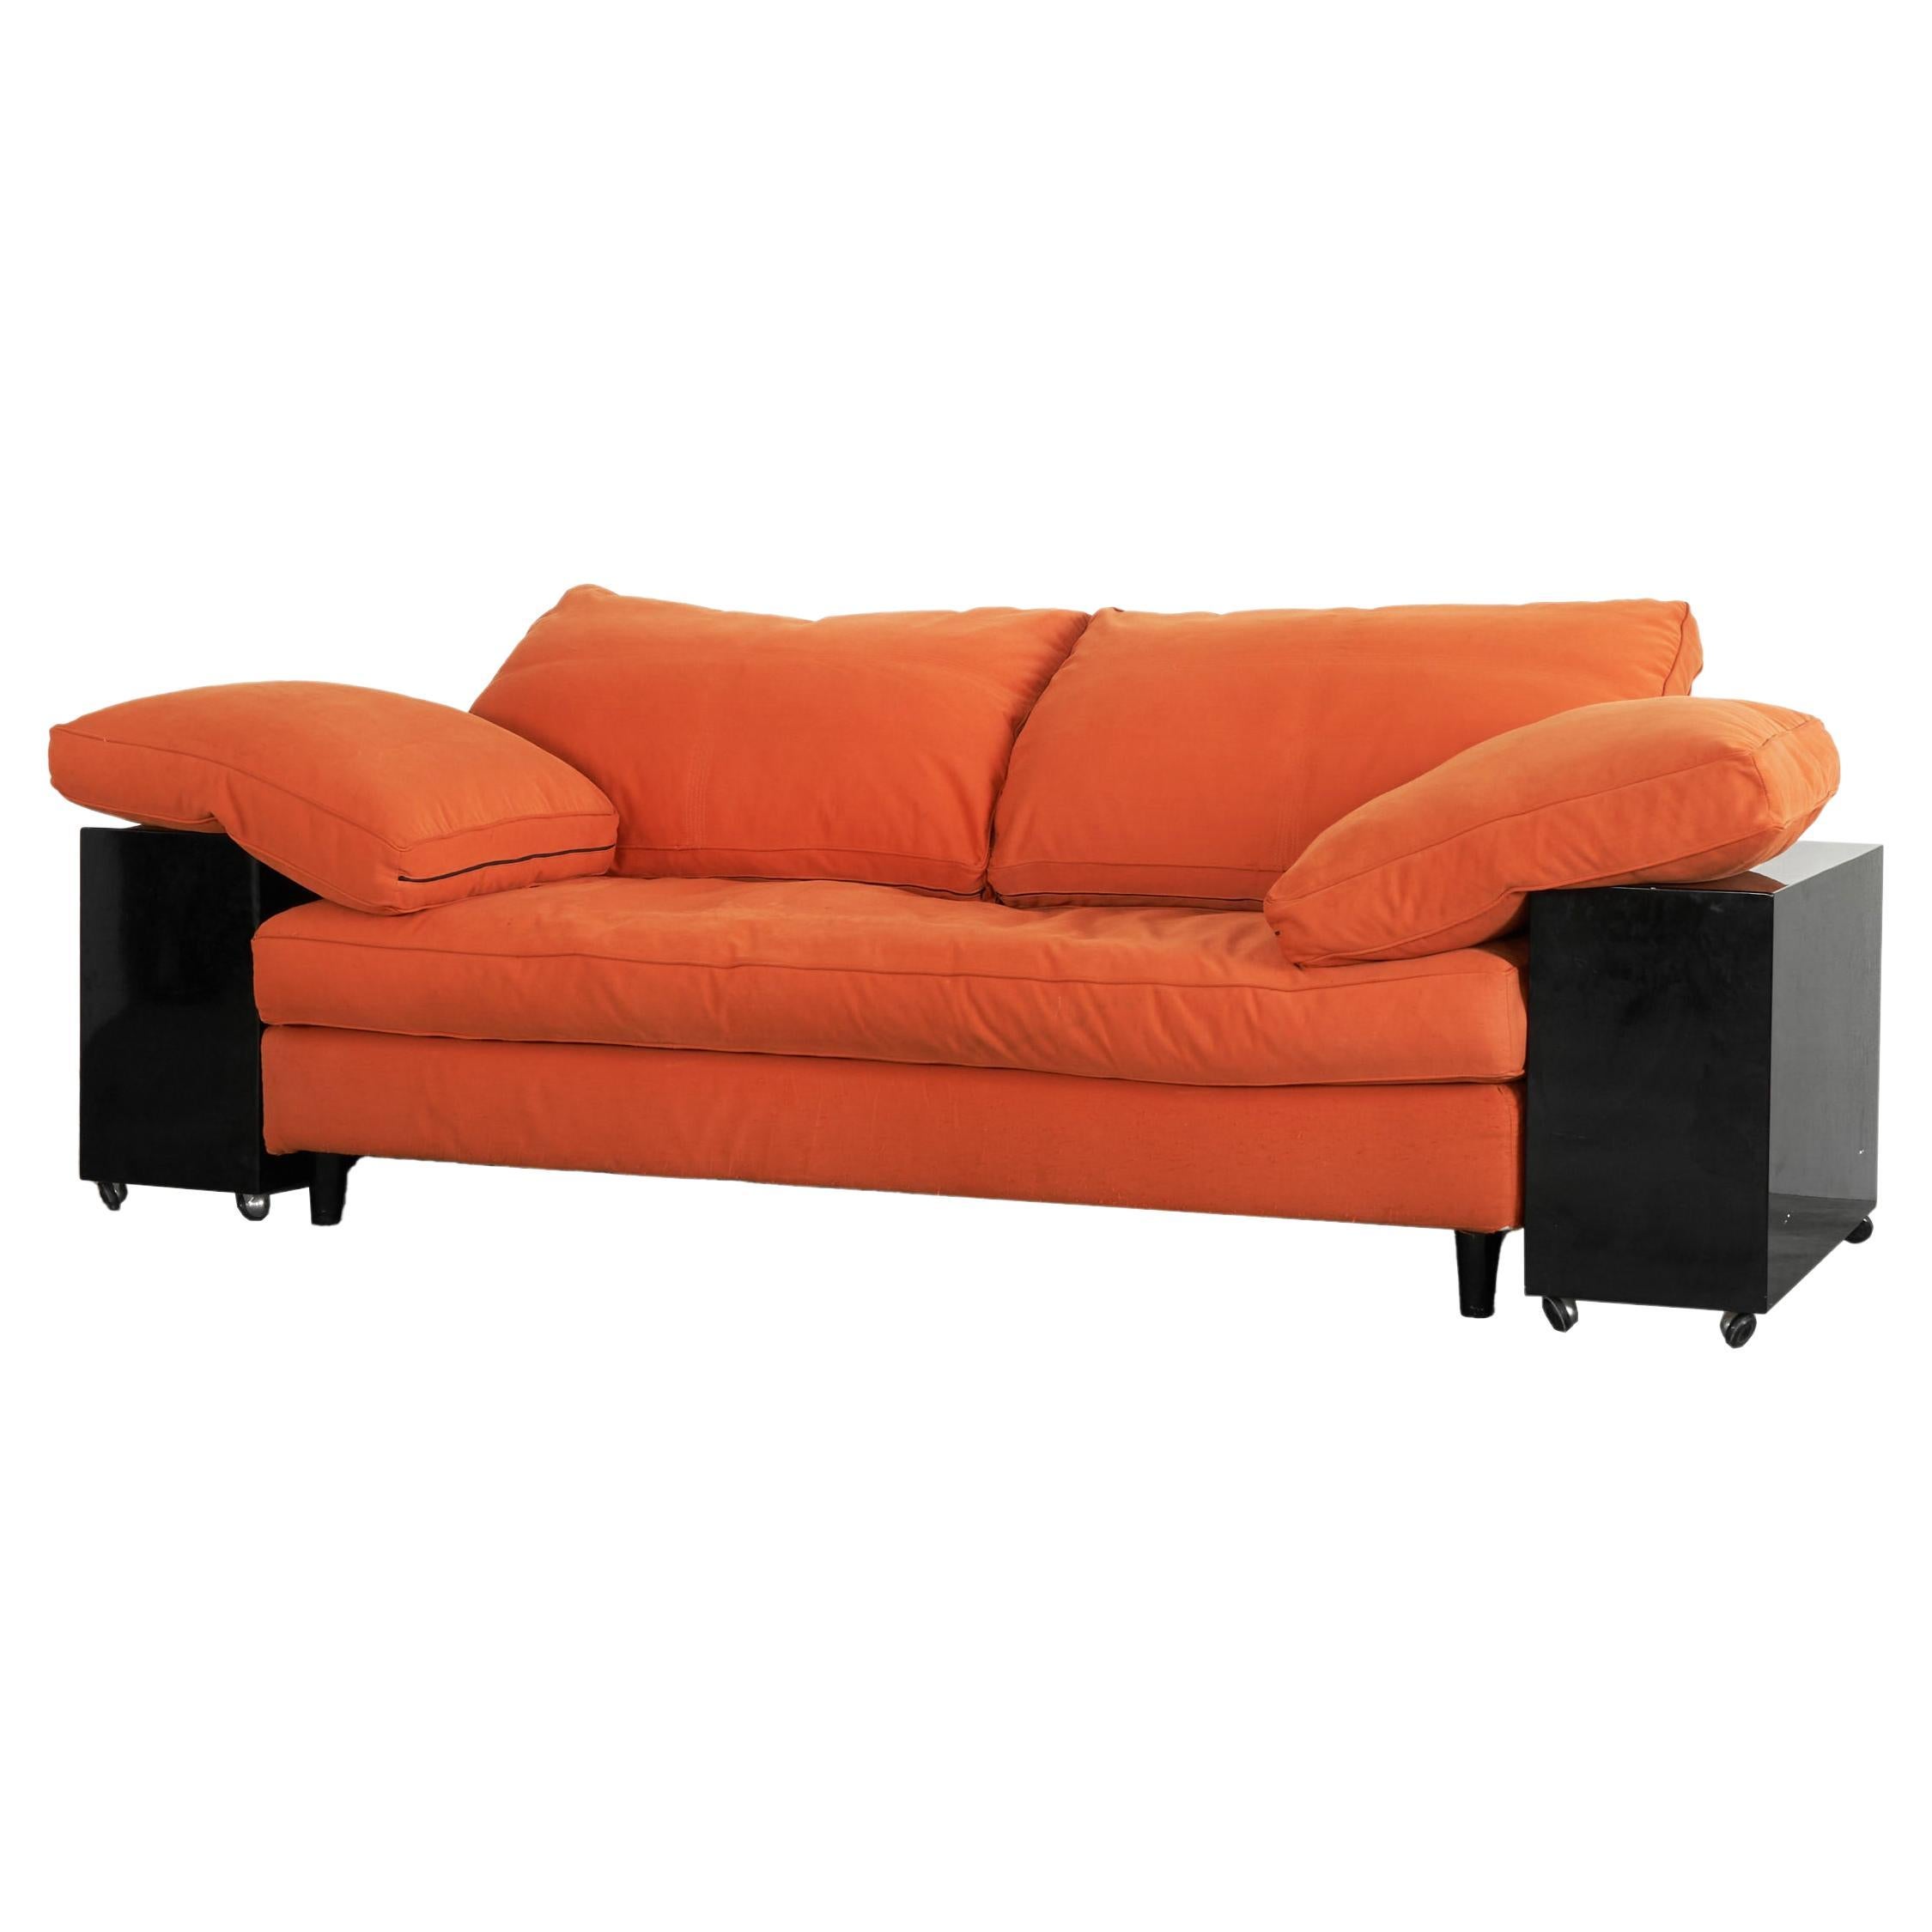 Eileen Gray 'Lota' Sofa in Black Lacquer and Orange Fabric 1980s